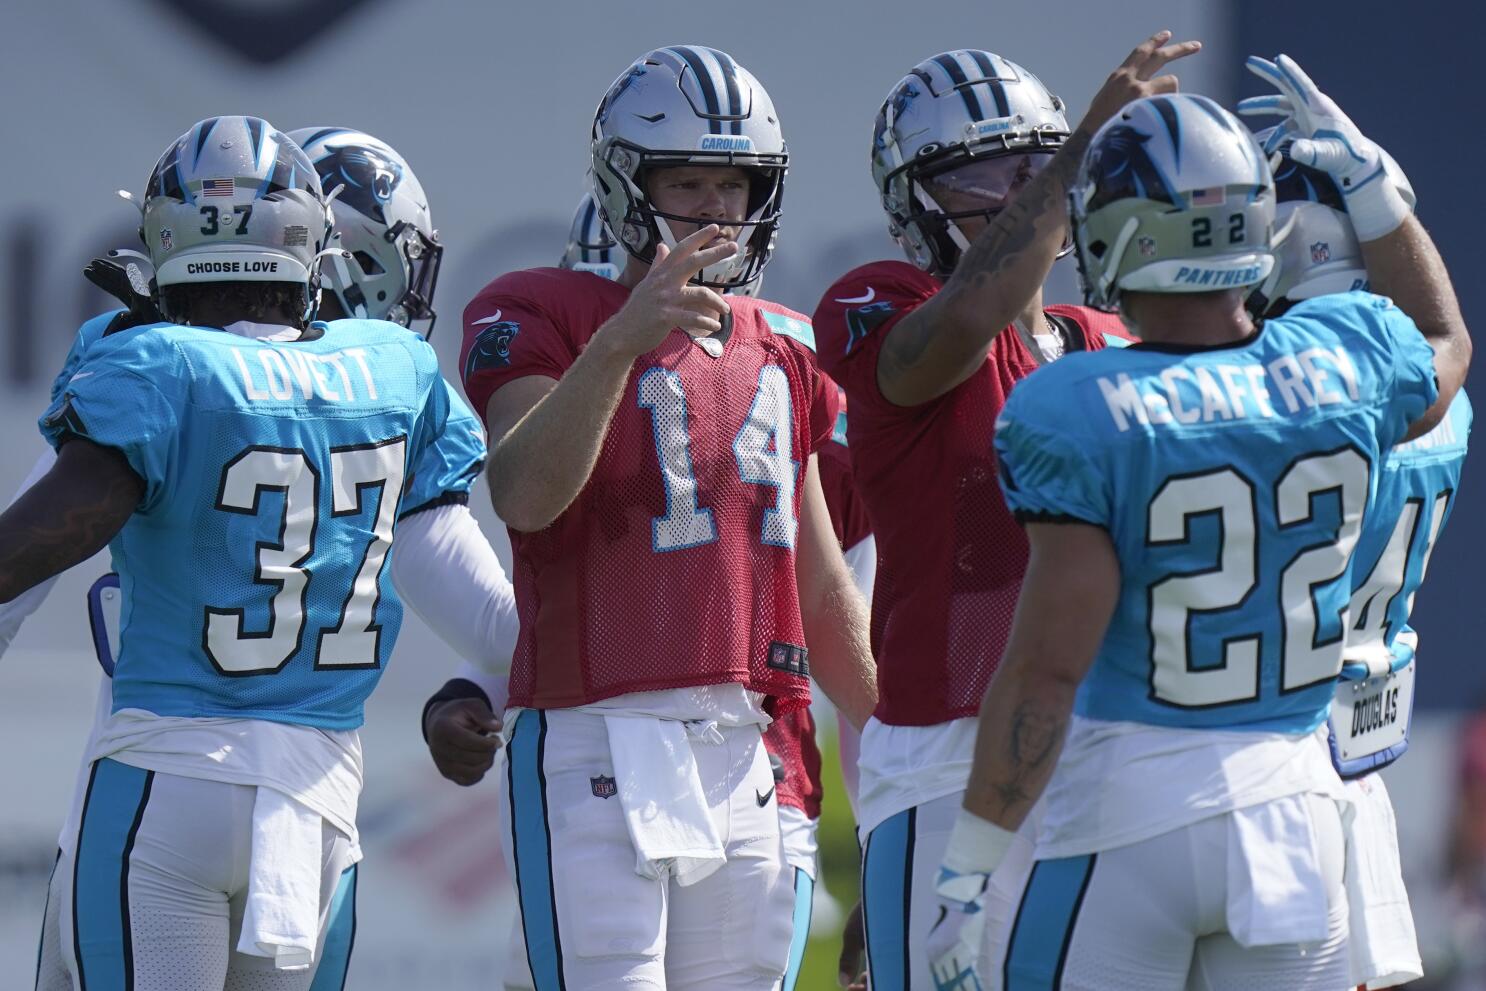 Panthers, Pats aiming to improve offenses at joint practices